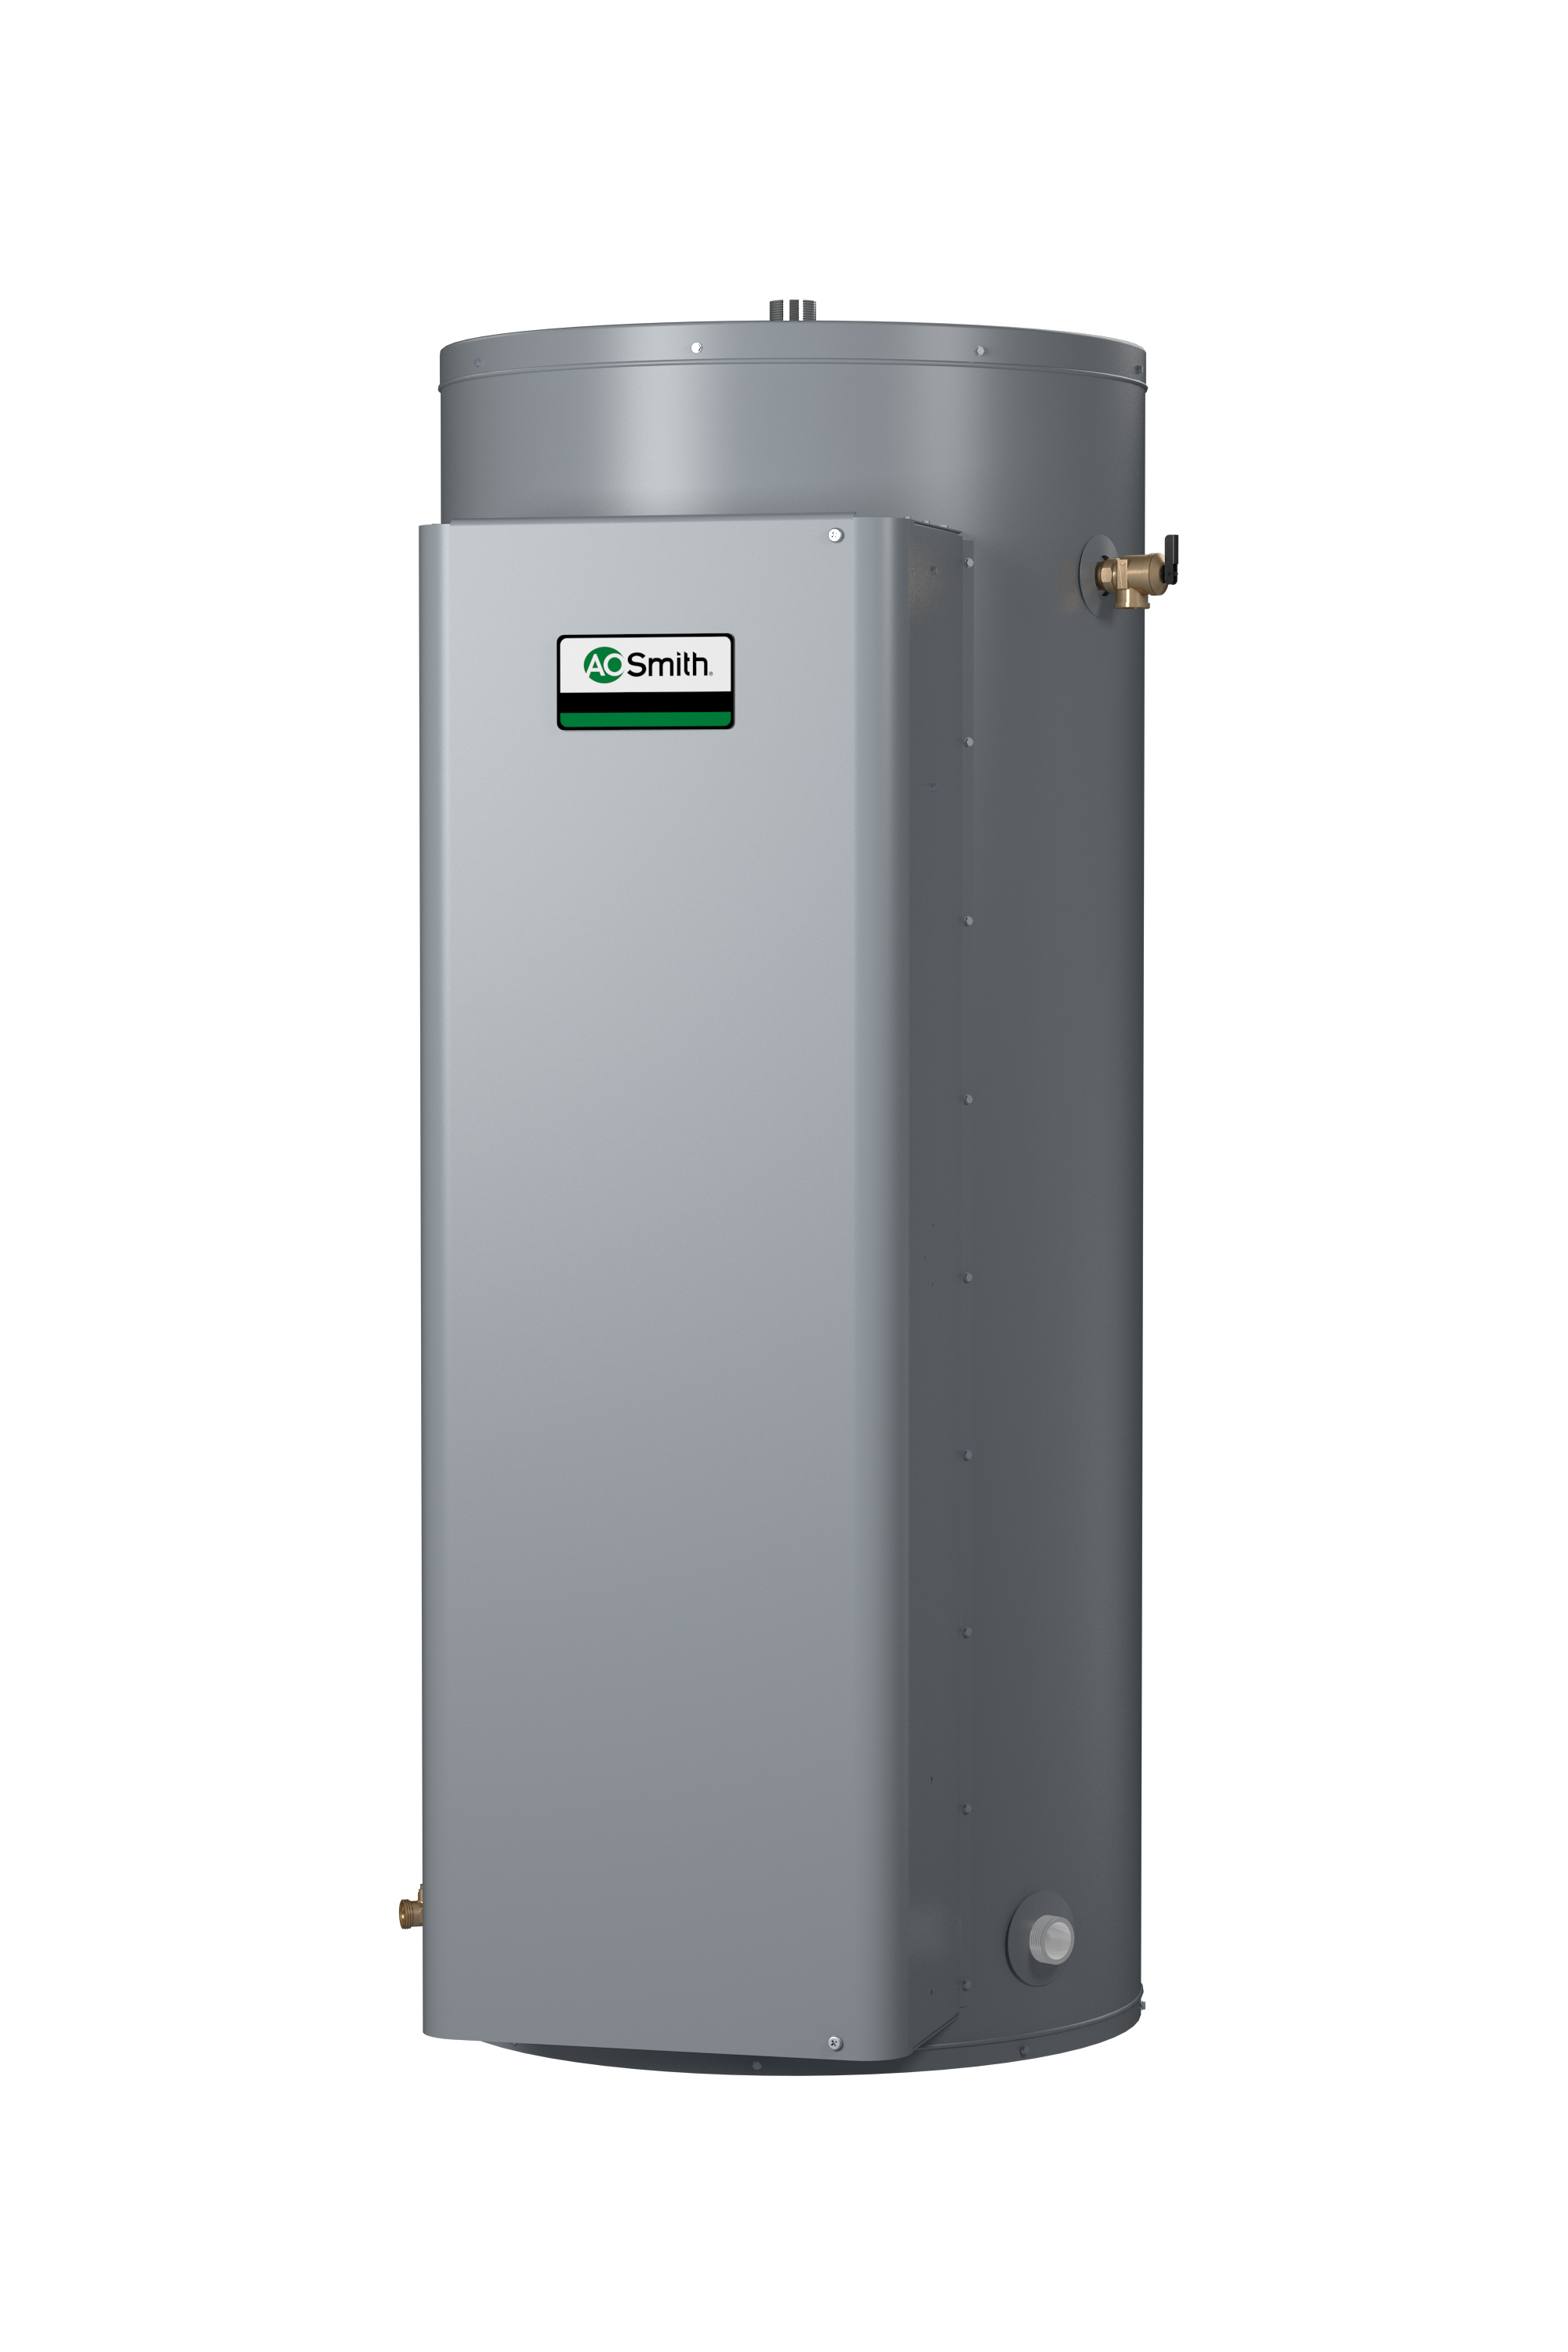 AO SMITH DVE-120-12, 119 GALLONS, 12.3KW, 208 VOLT, 57.7 AMPS, 1 PHASE, 3 ELEMENT, GOLD Xi SERIES HEAVY DUTY COMMERCIAL ELECTRIC WATER HEATER